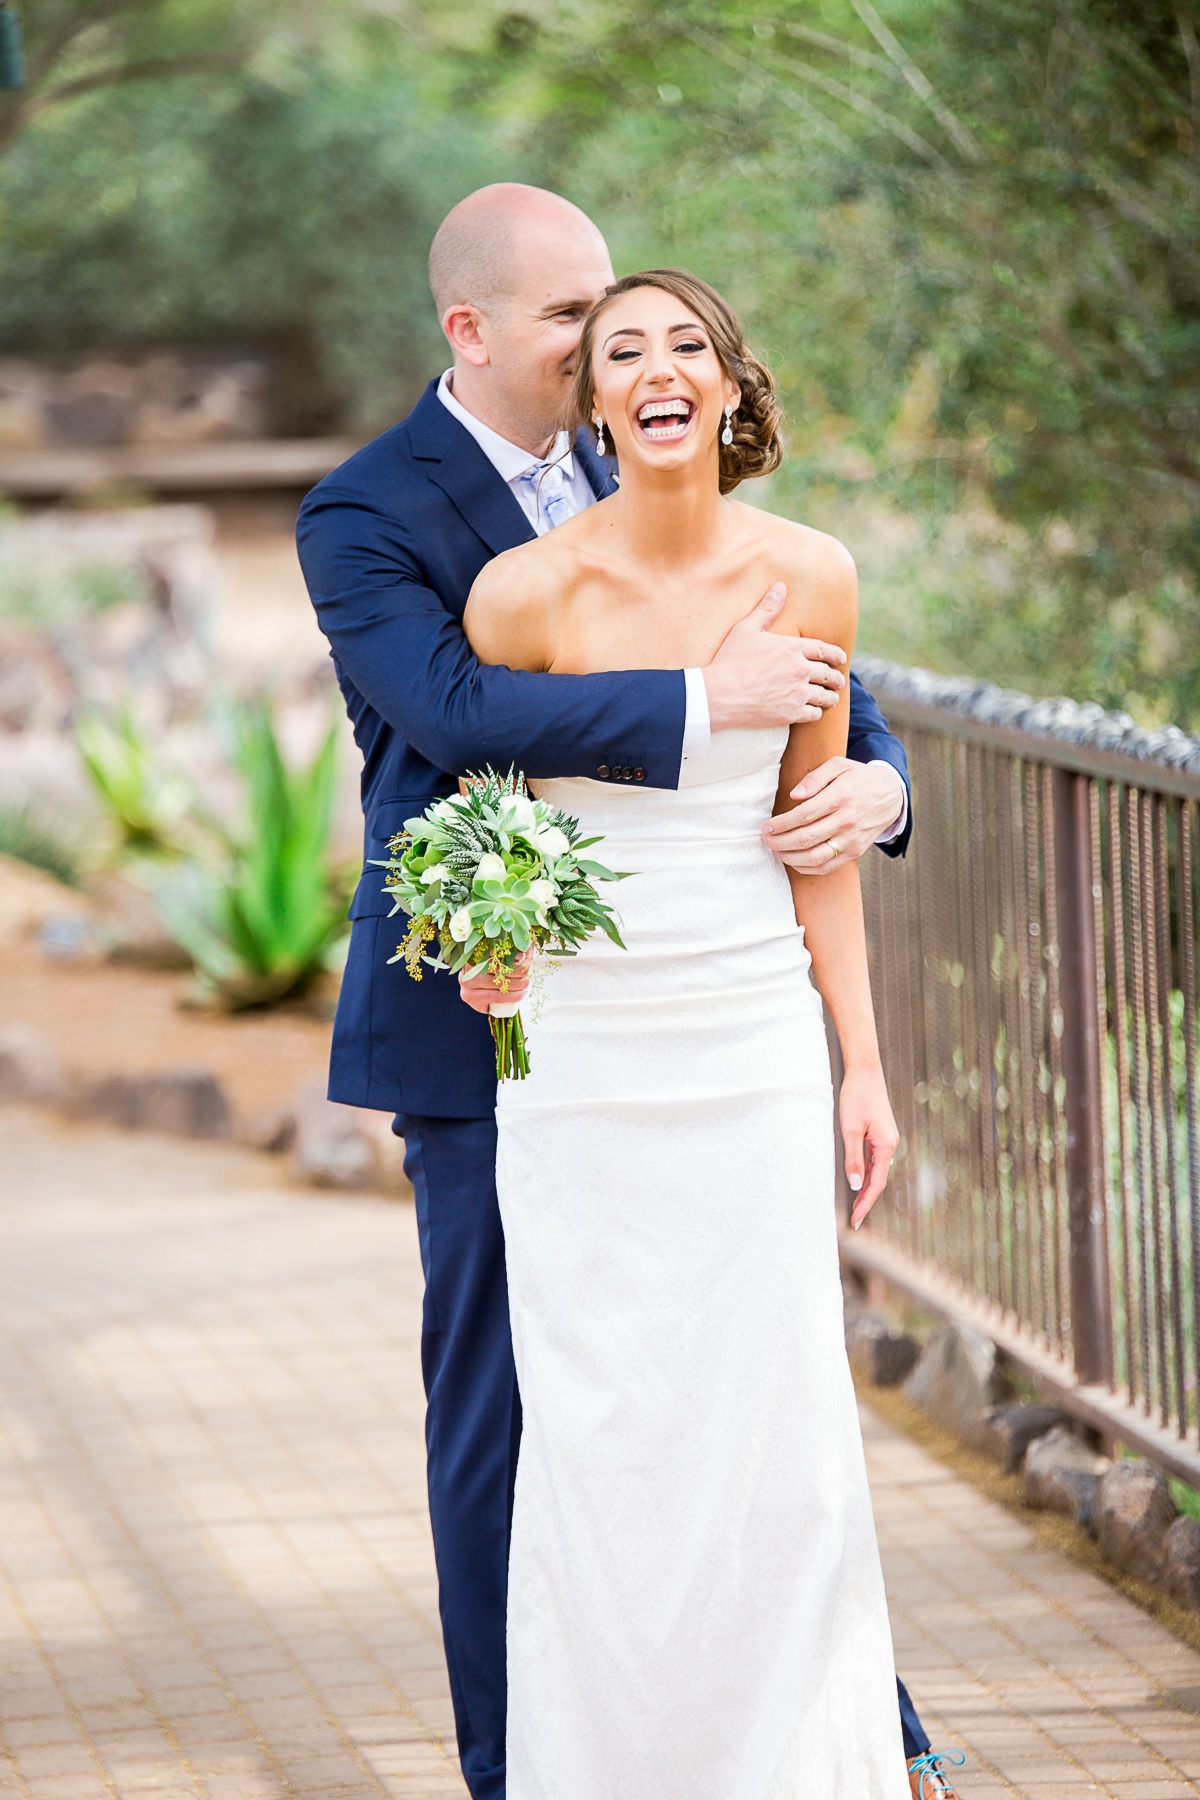 Copy of affordable wedding photography phoenix